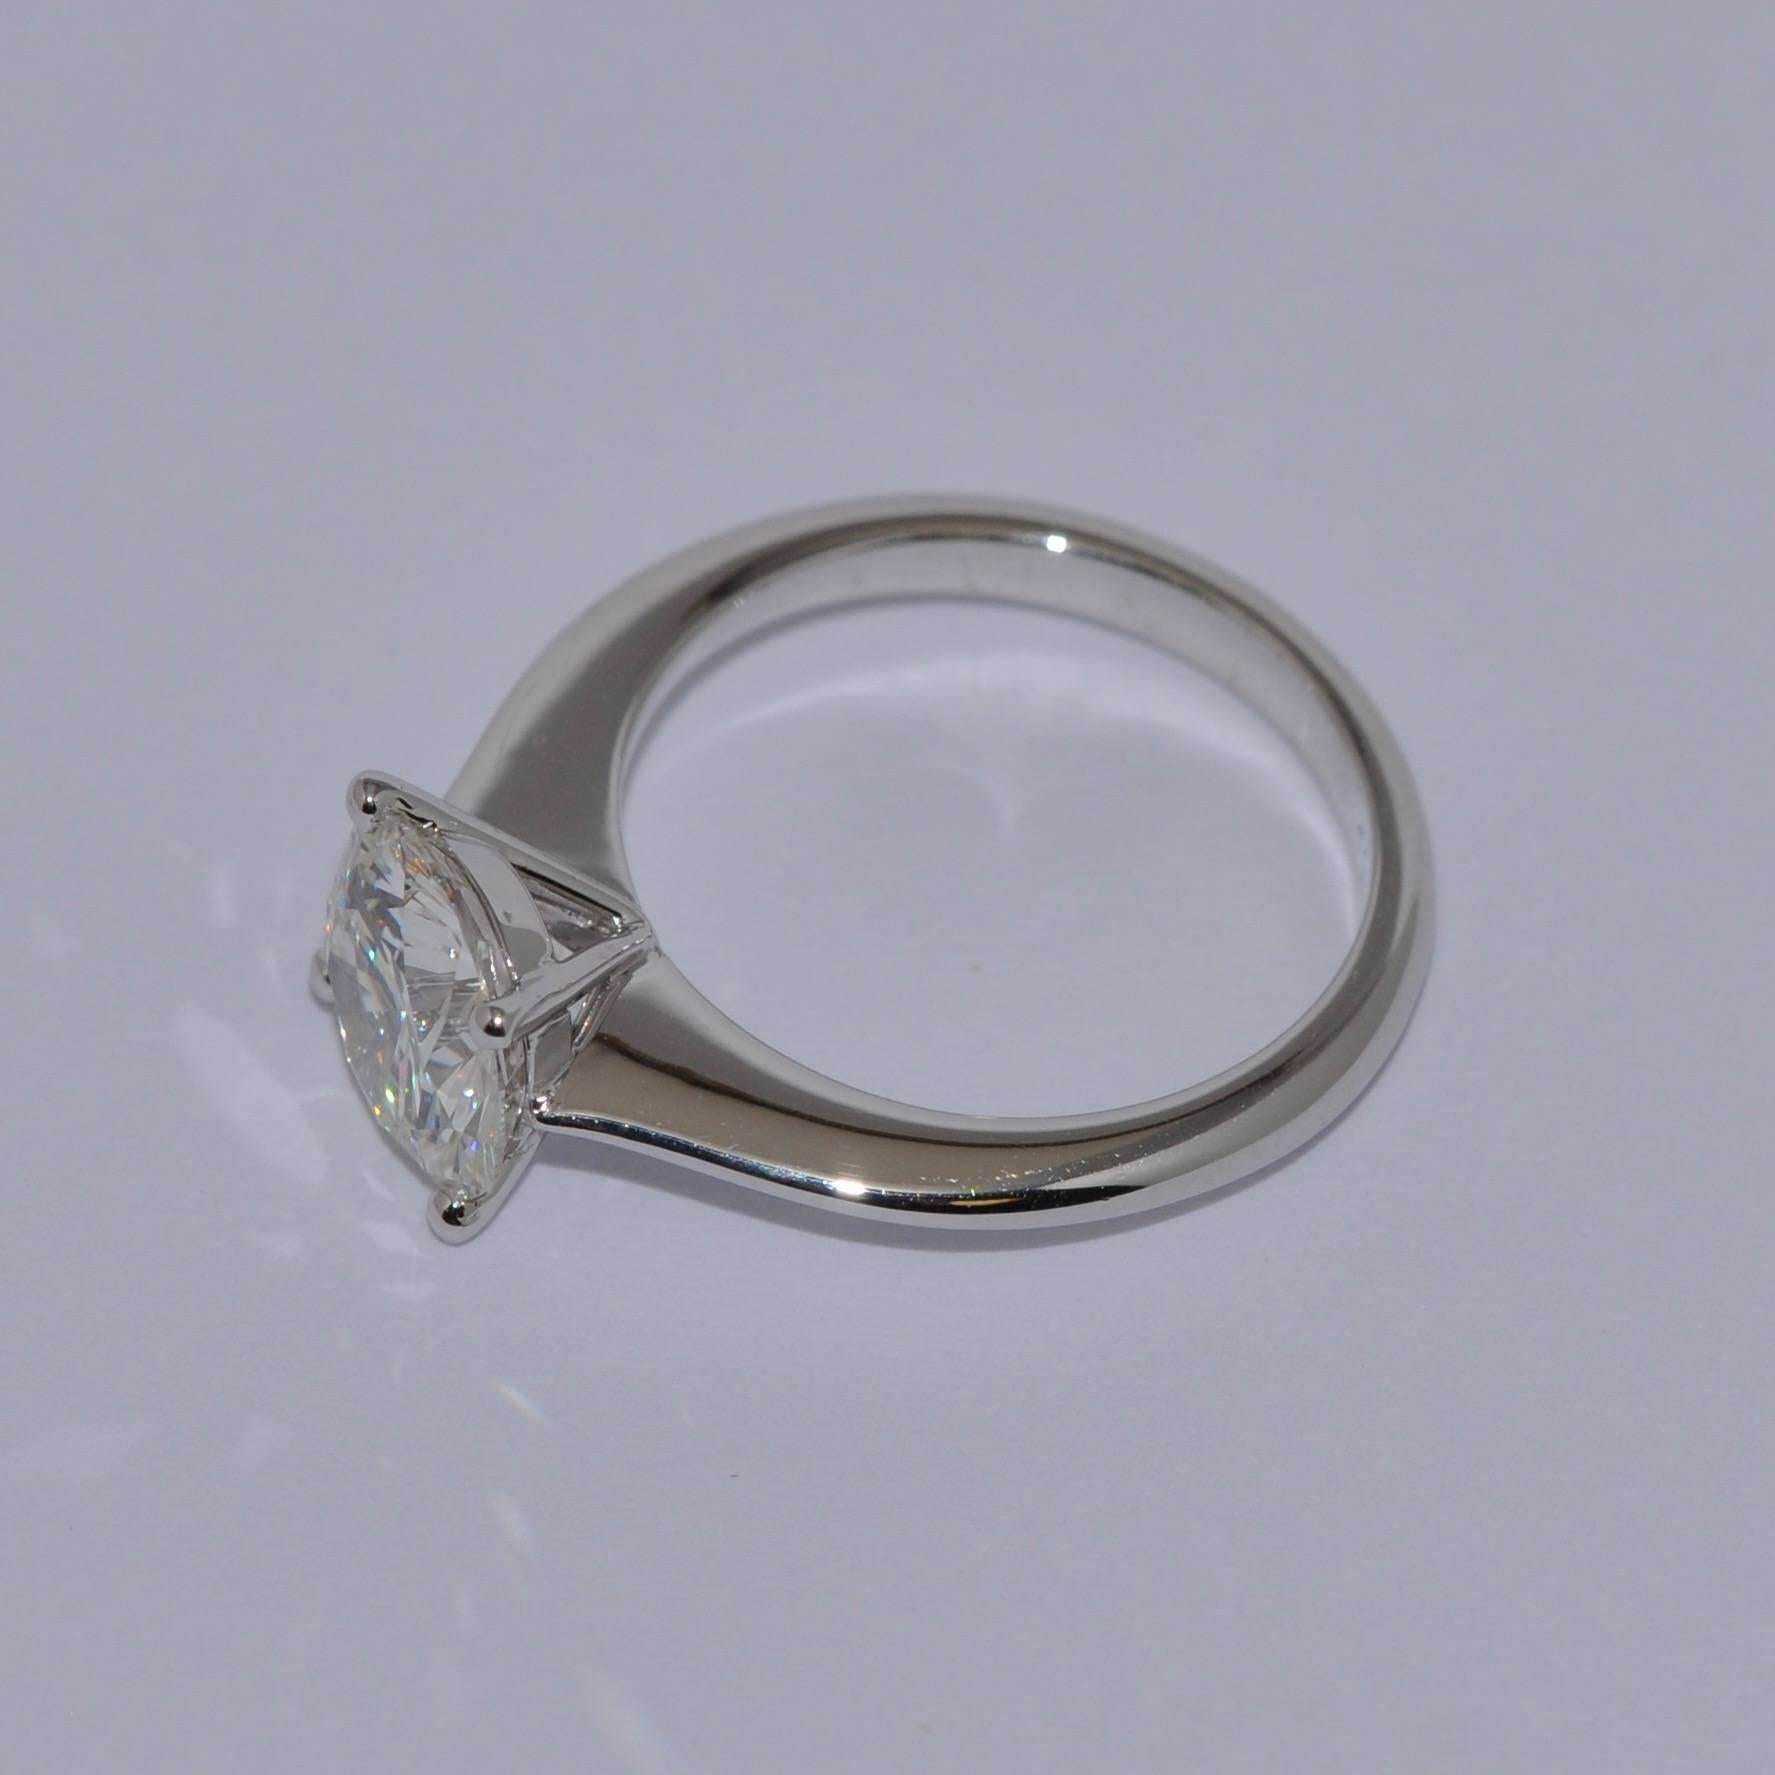 Discover this Unique Solitaire Certified Diamond 2.28 Carat 4 Claws Engagement Ring.
Solitaire Certified HRD Brilliant Diamond 2.28 Carat Color H VS2 8.73*8.75*5.05 mm
White Gold 18 Carat 
Size On Demand


